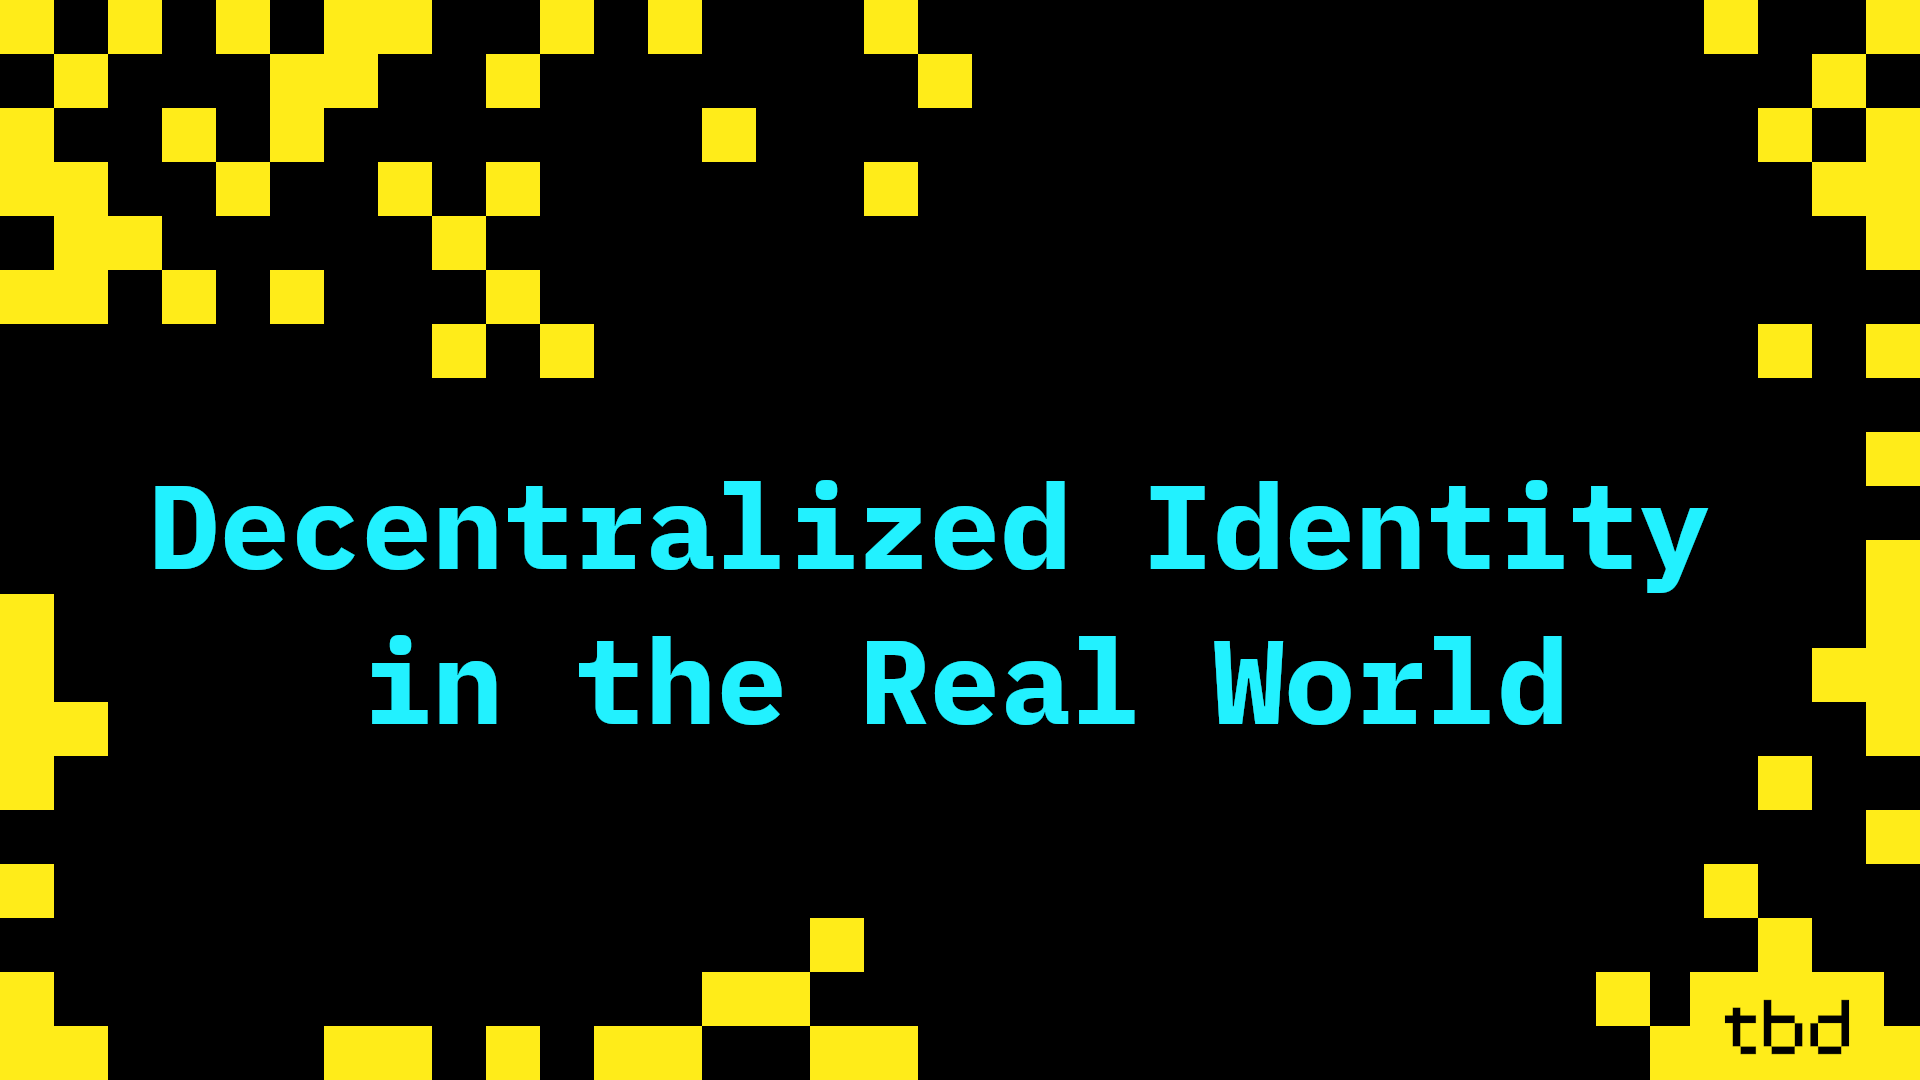 Decentralized Identity in the Real World